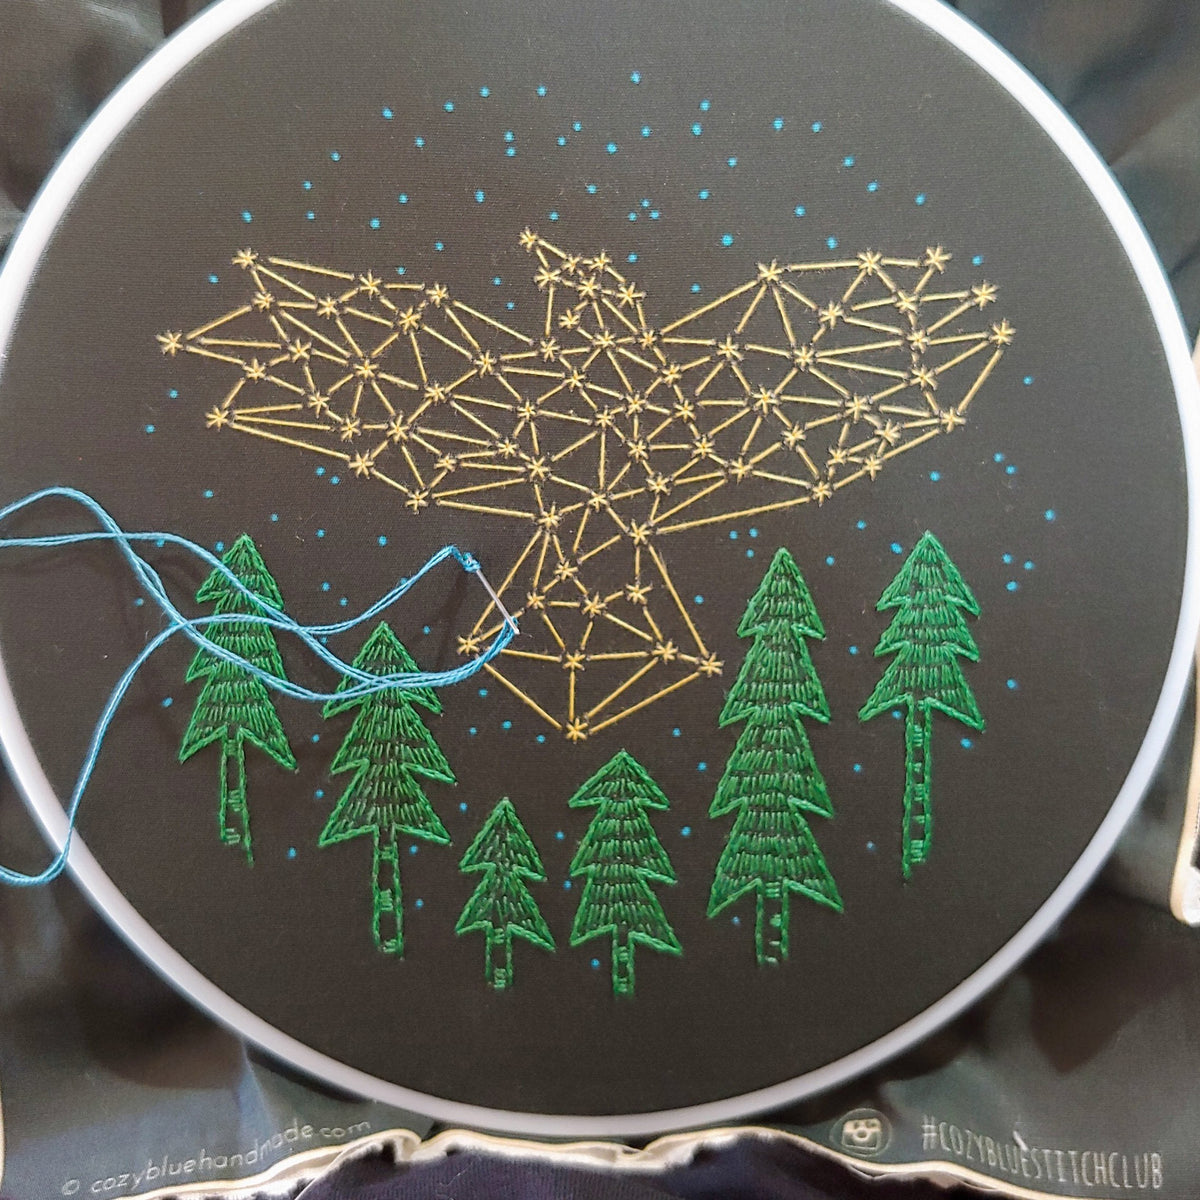 The Crow Hand Embroidery Kit